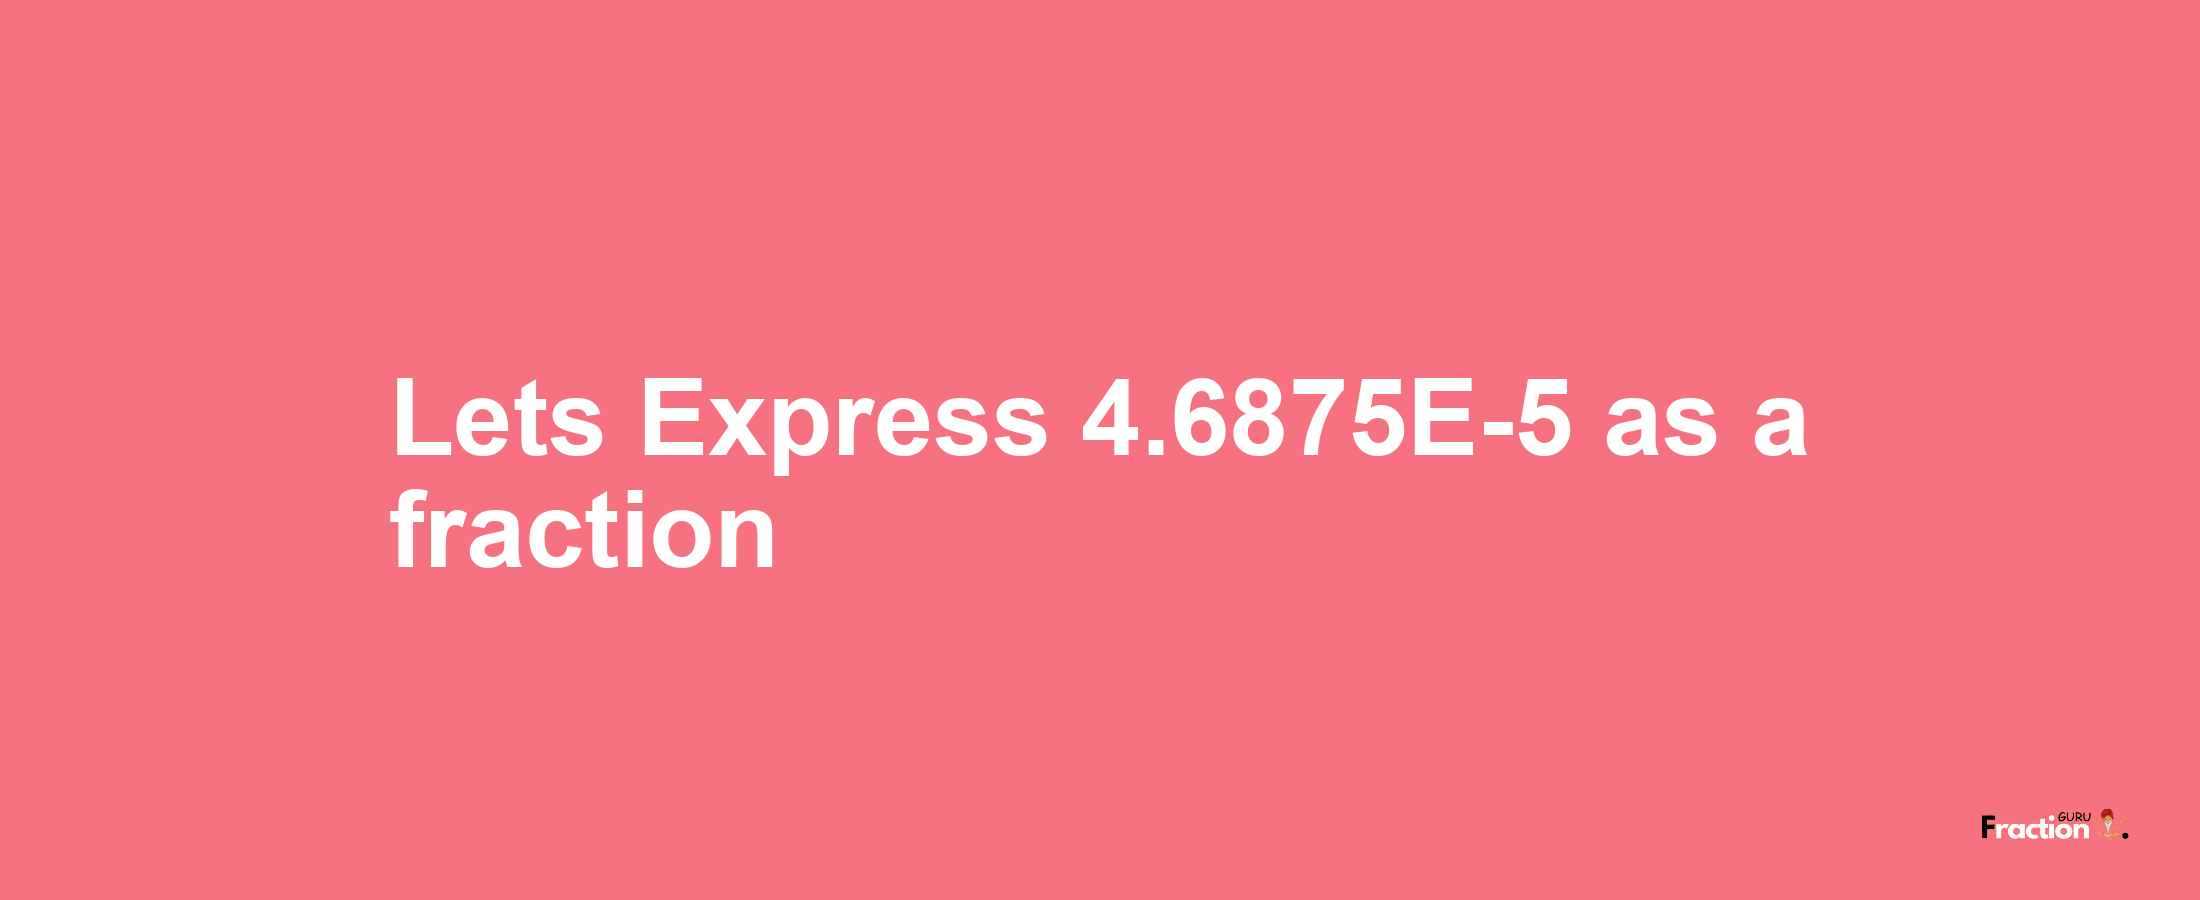 Lets Express 4.6875E-5 as afraction